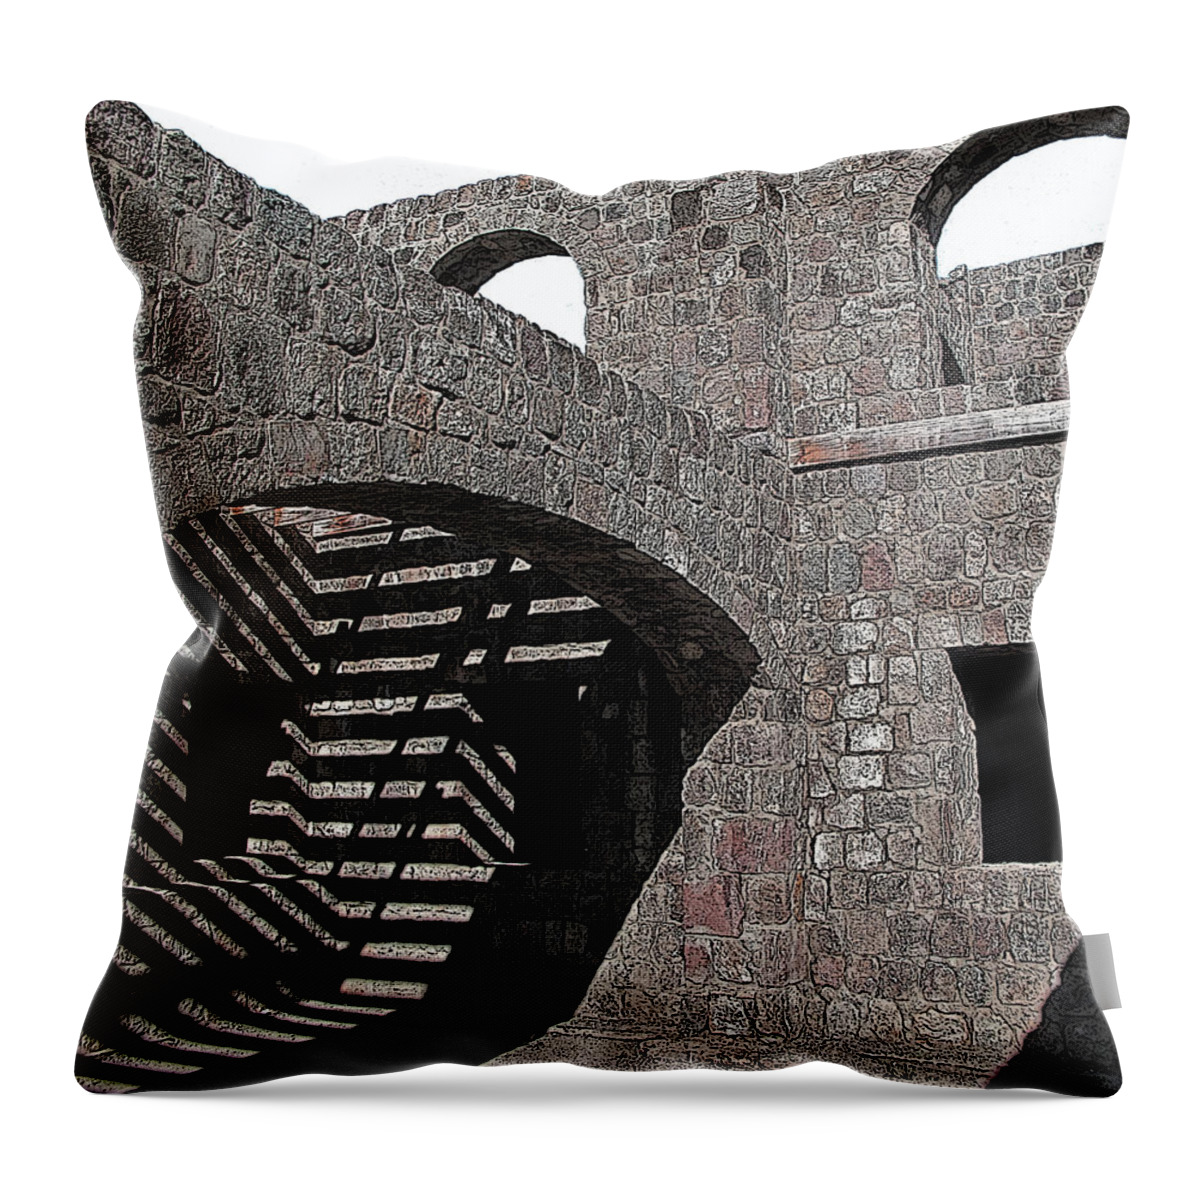 Stone Throw Pillow featuring the photograph Shadow Box by Ian MacDonald